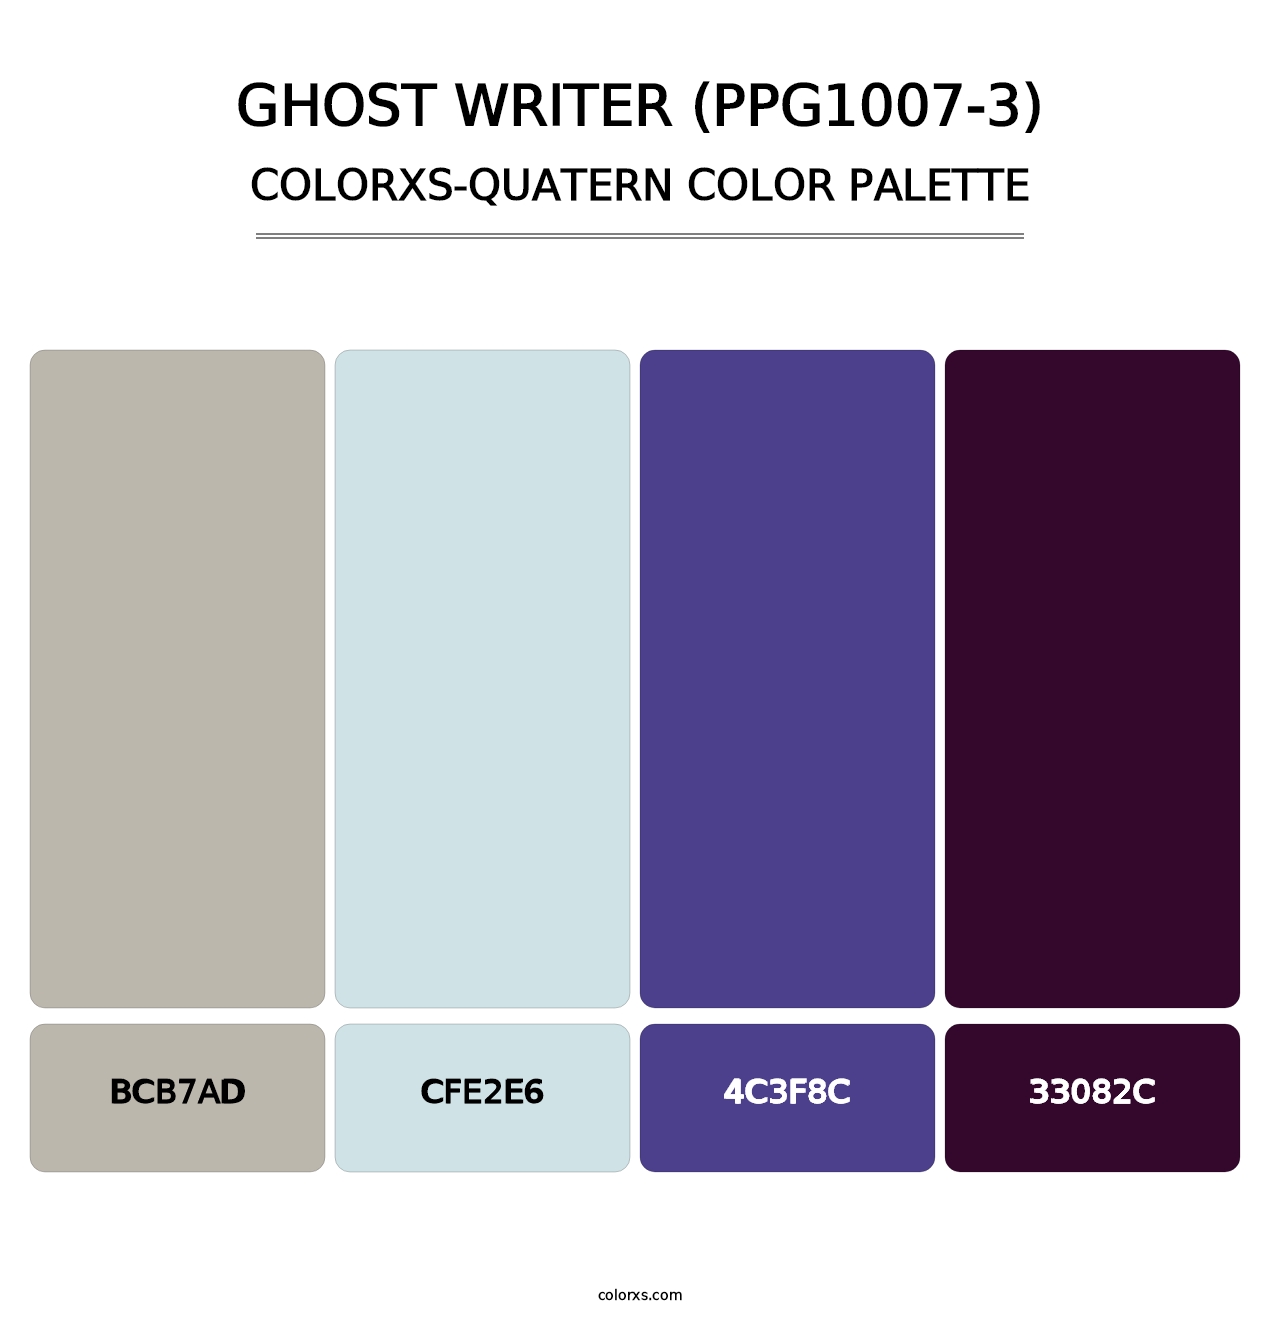 Ghost Writer (PPG1007-3) - Colorxs Quatern Palette